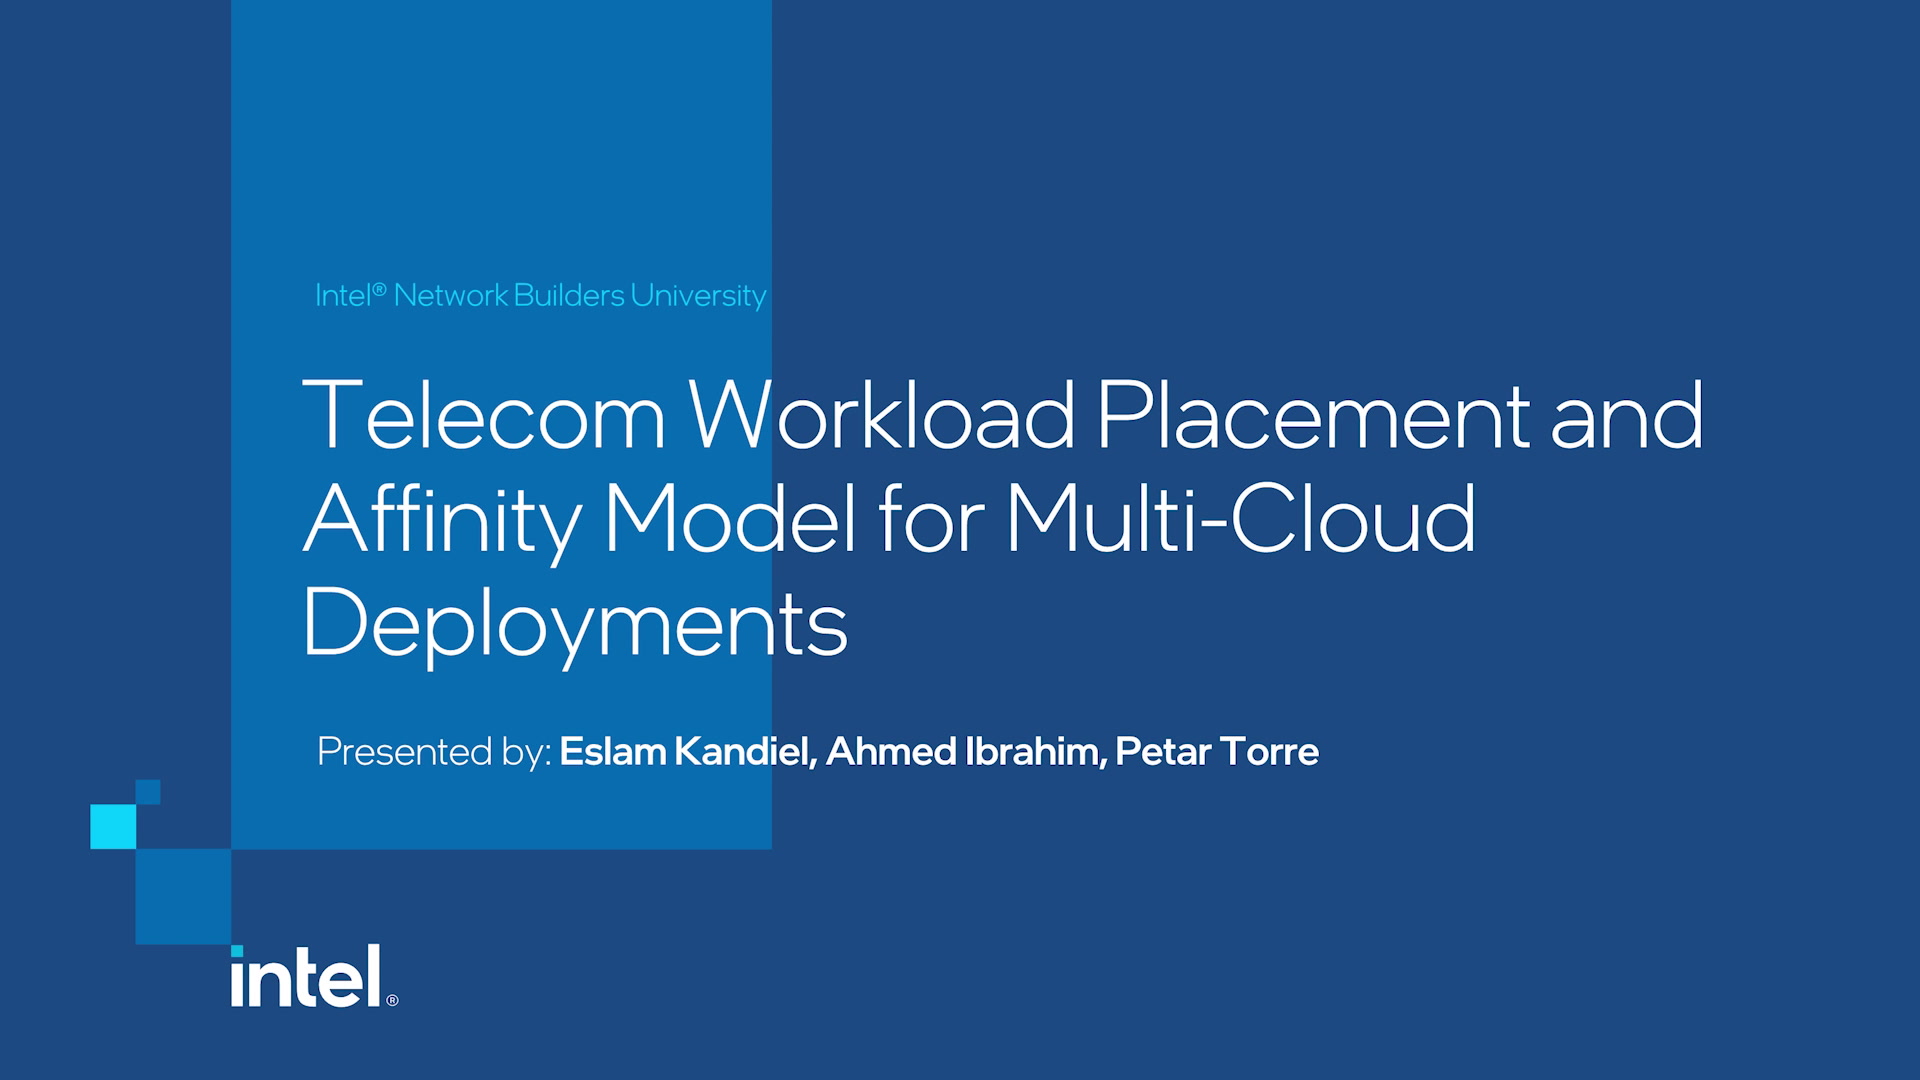 Telecom Workload Placement and Affinity Model for Multi-Cloud Deployments